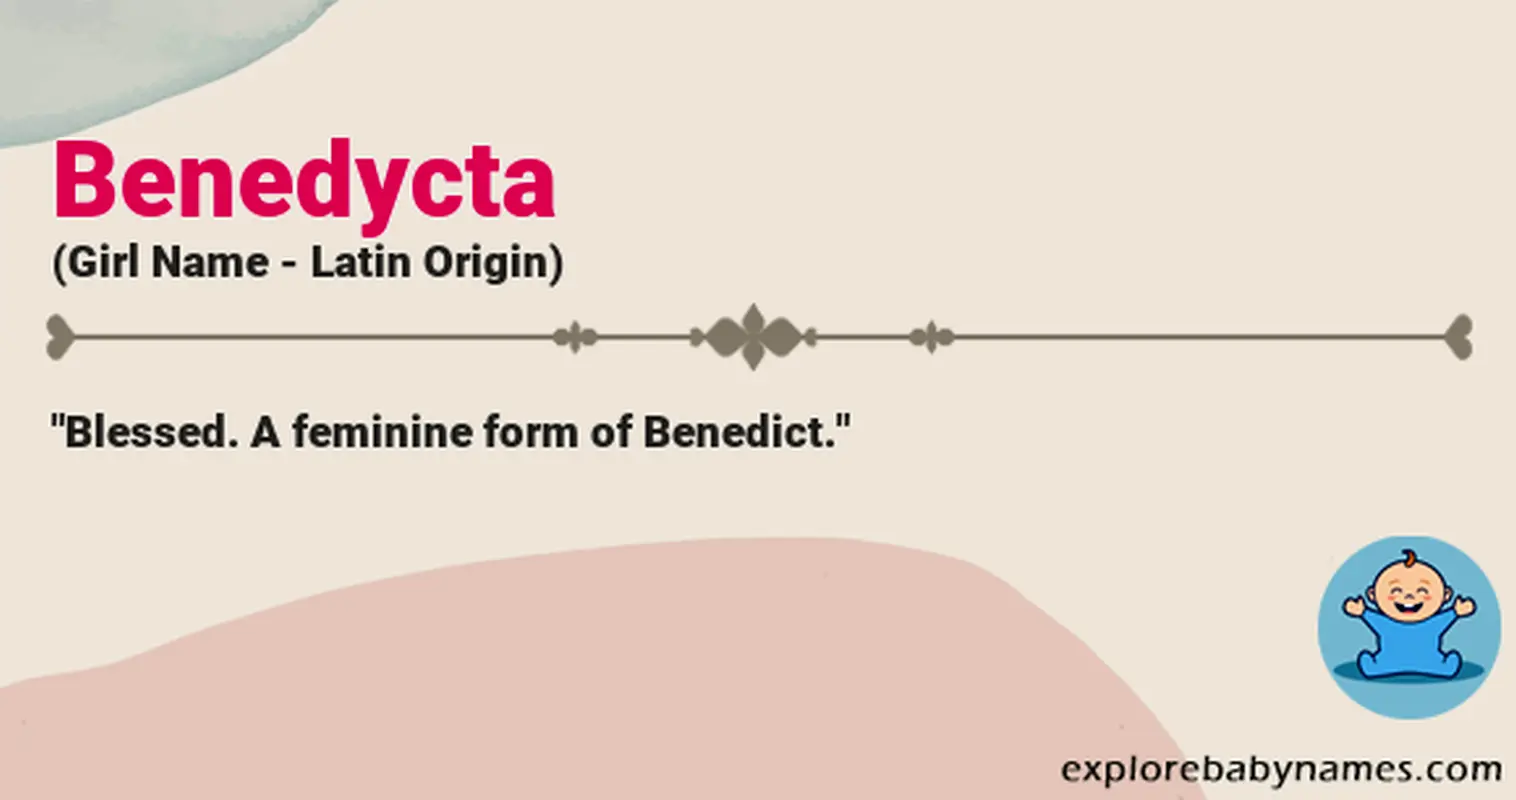 Meaning of Benedycta